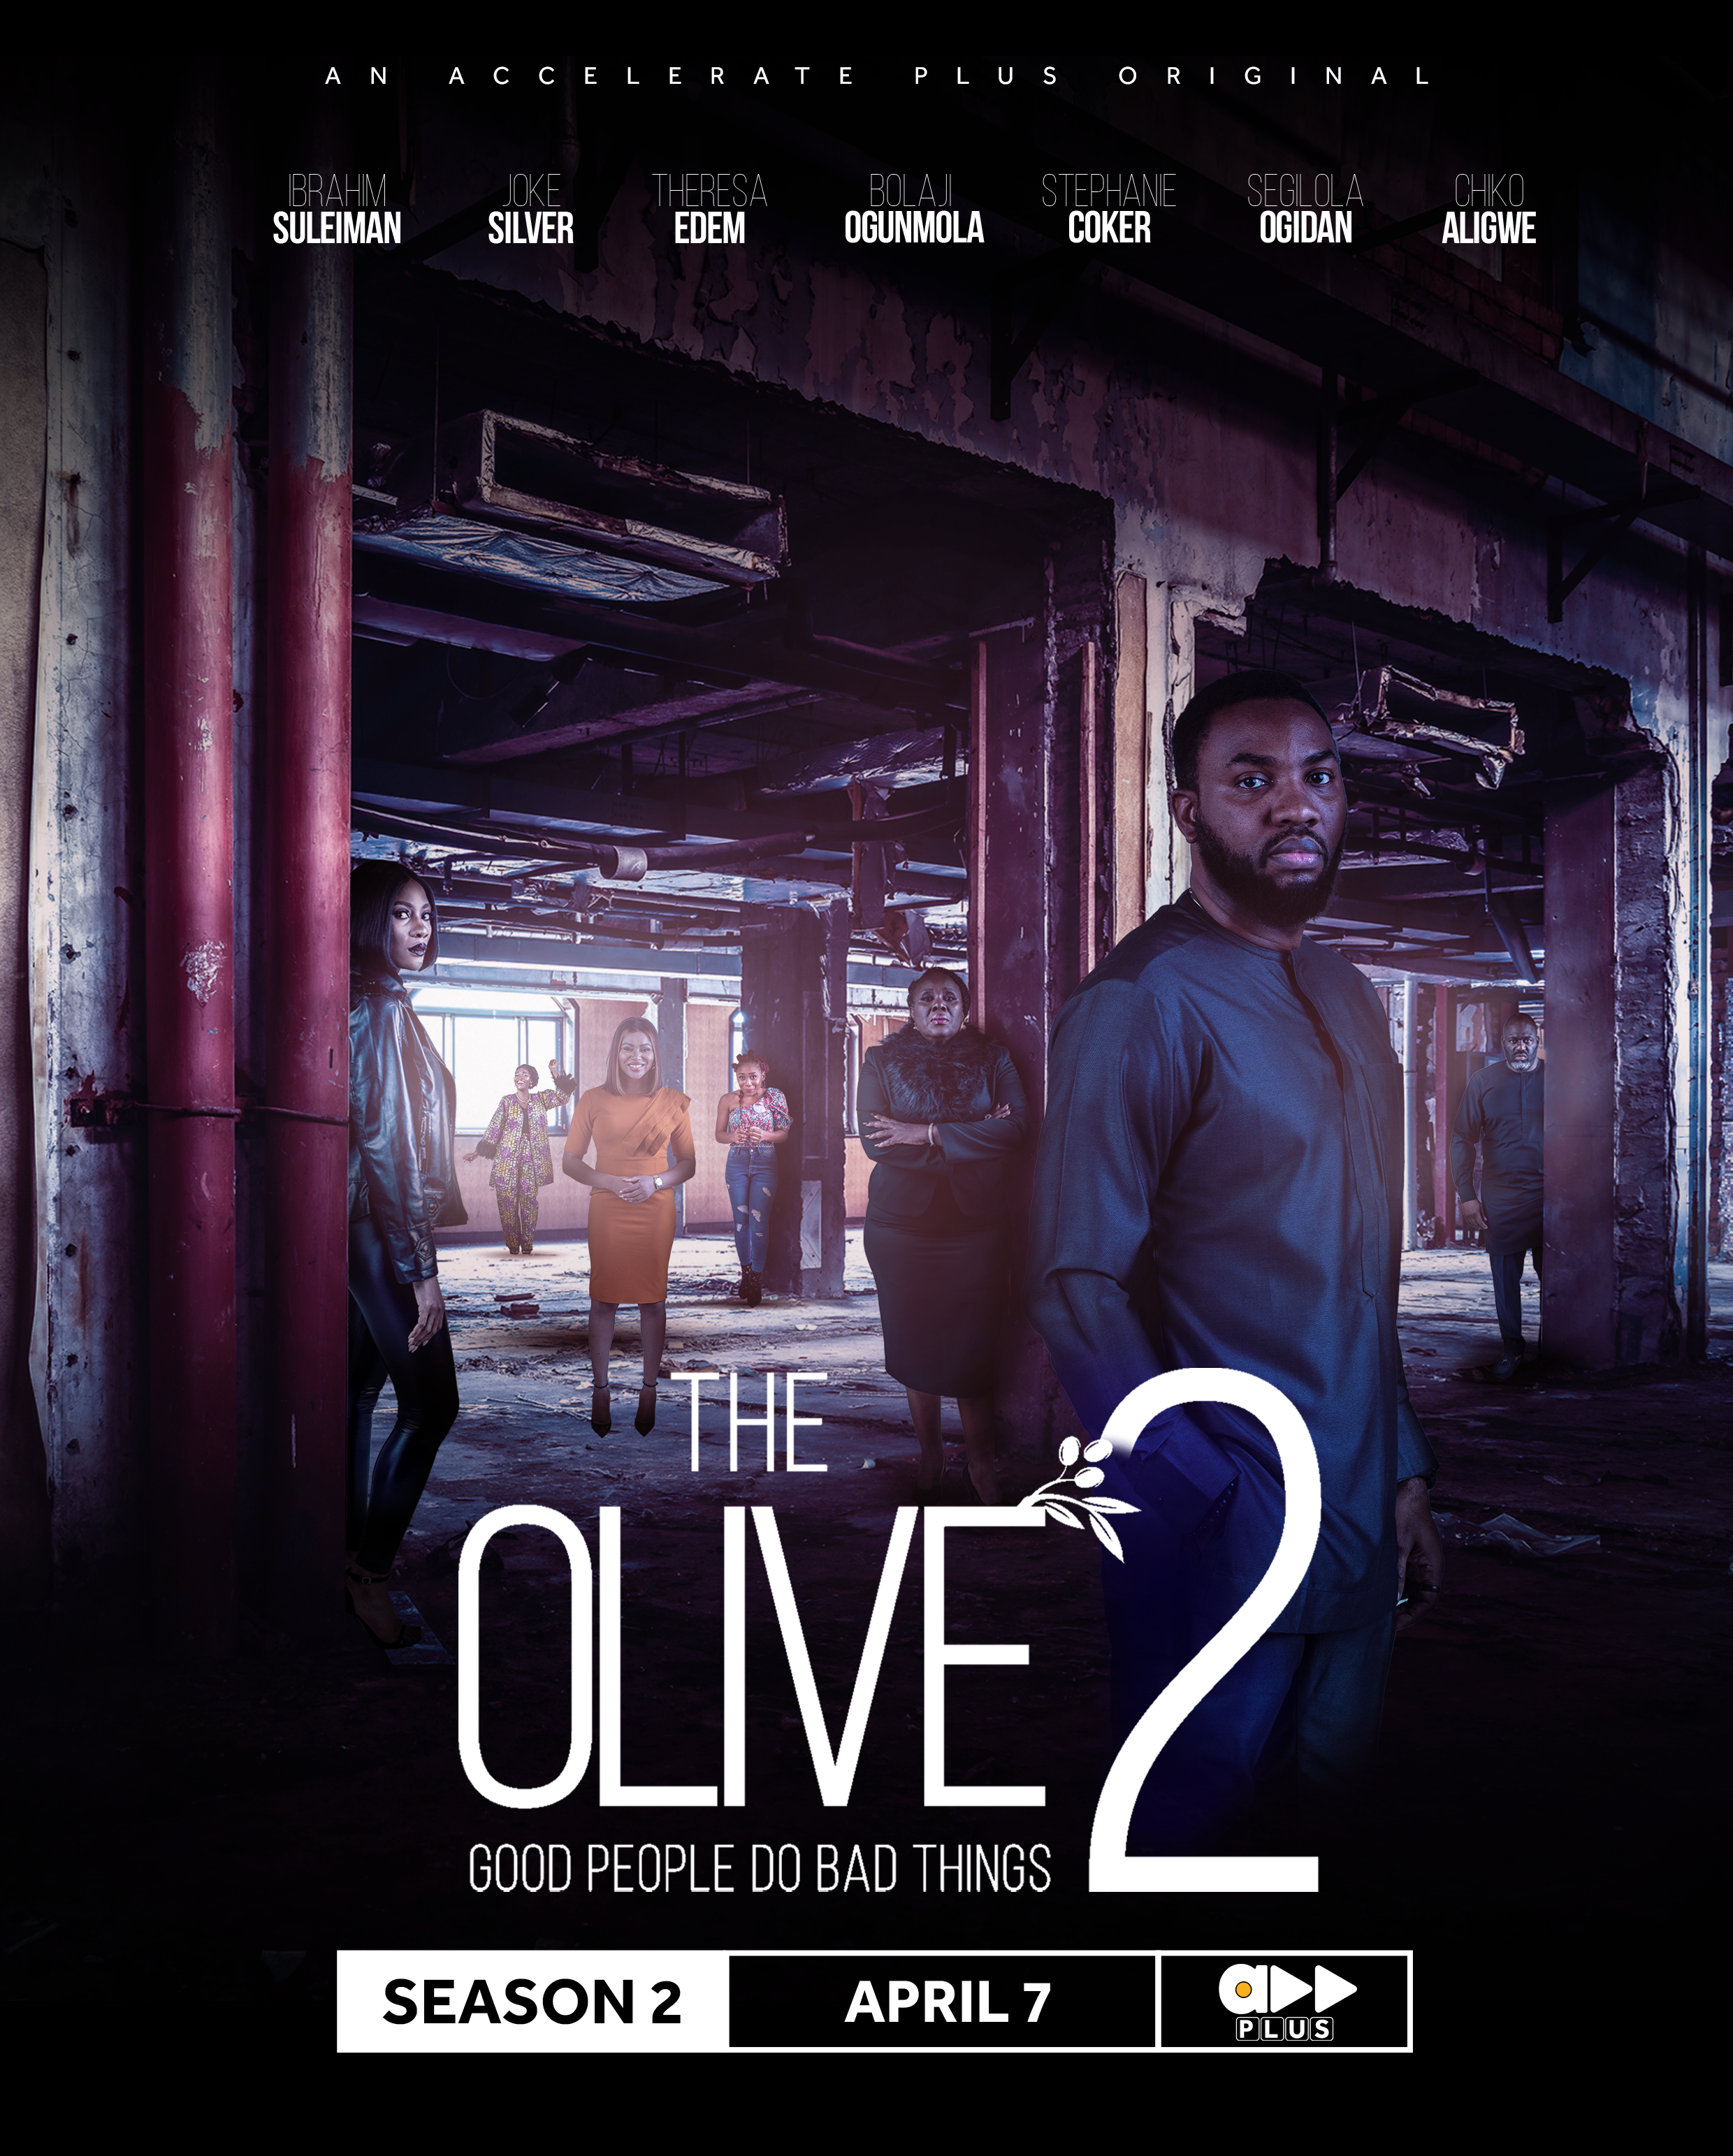 The Olive s2 Poster - Accelerate TV's The Olive Releases It's Second Season